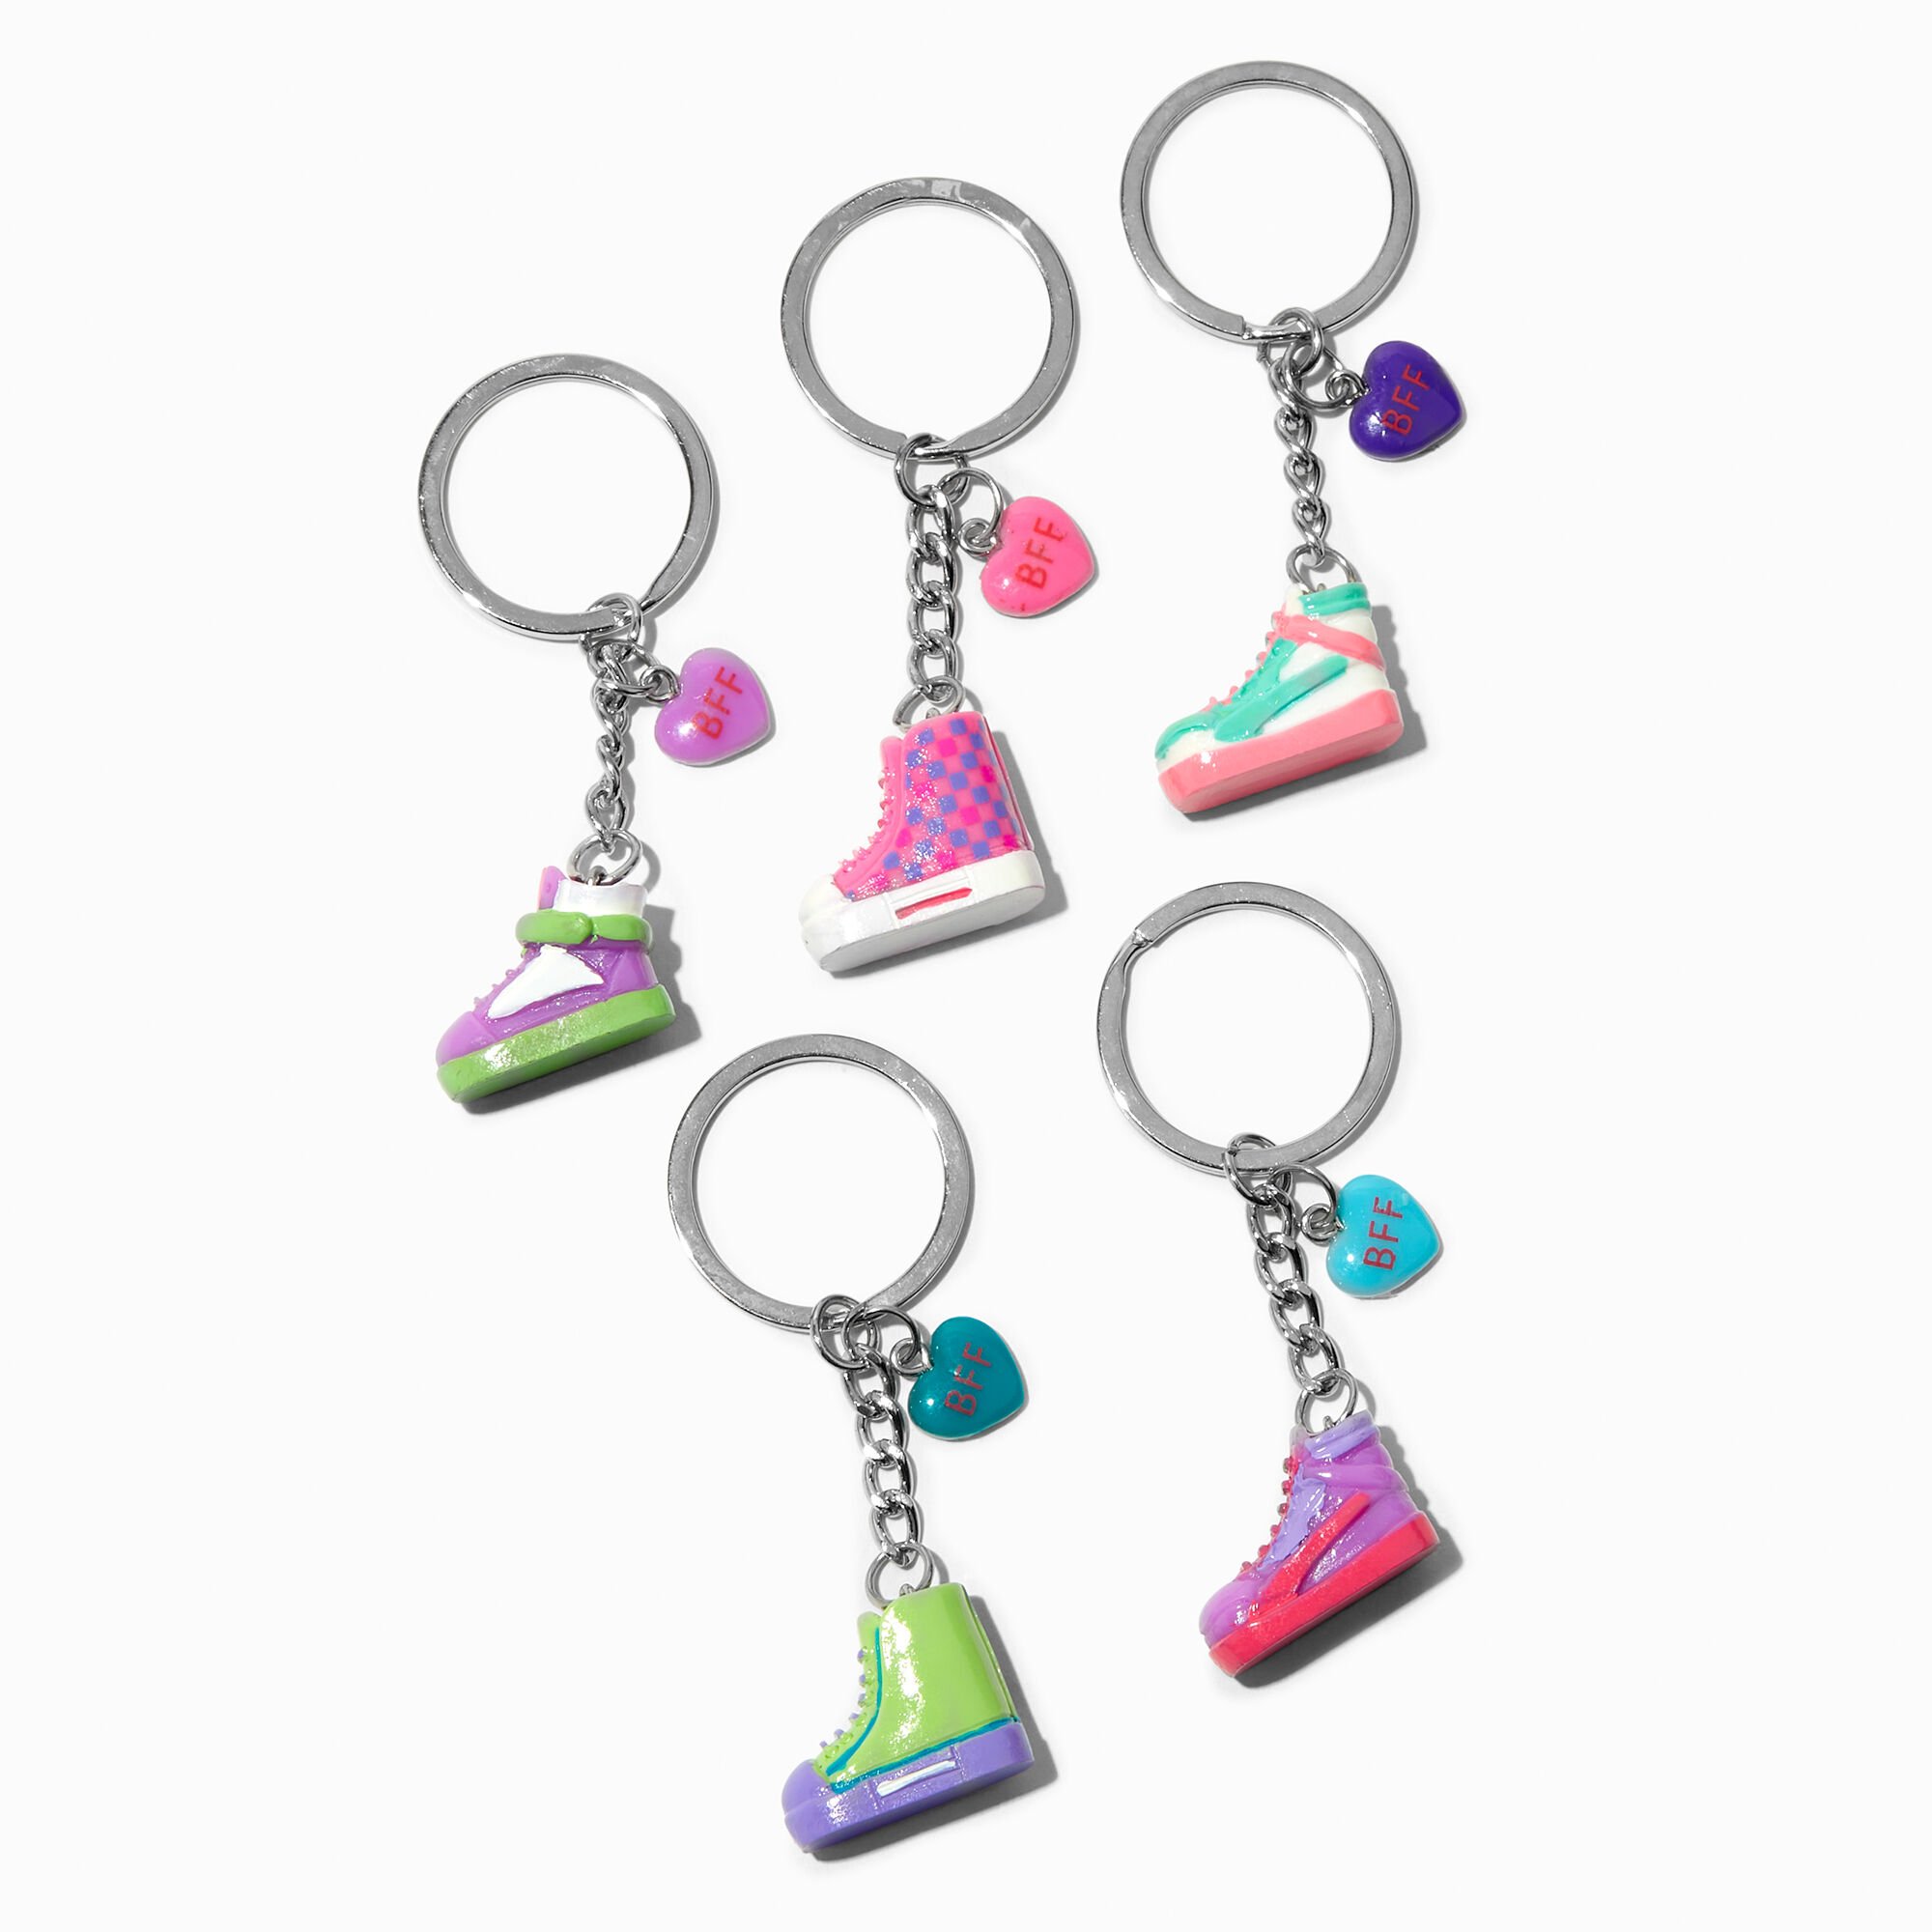 View Claires Sneaker Best Friends Keychains 5 Pack Silver information